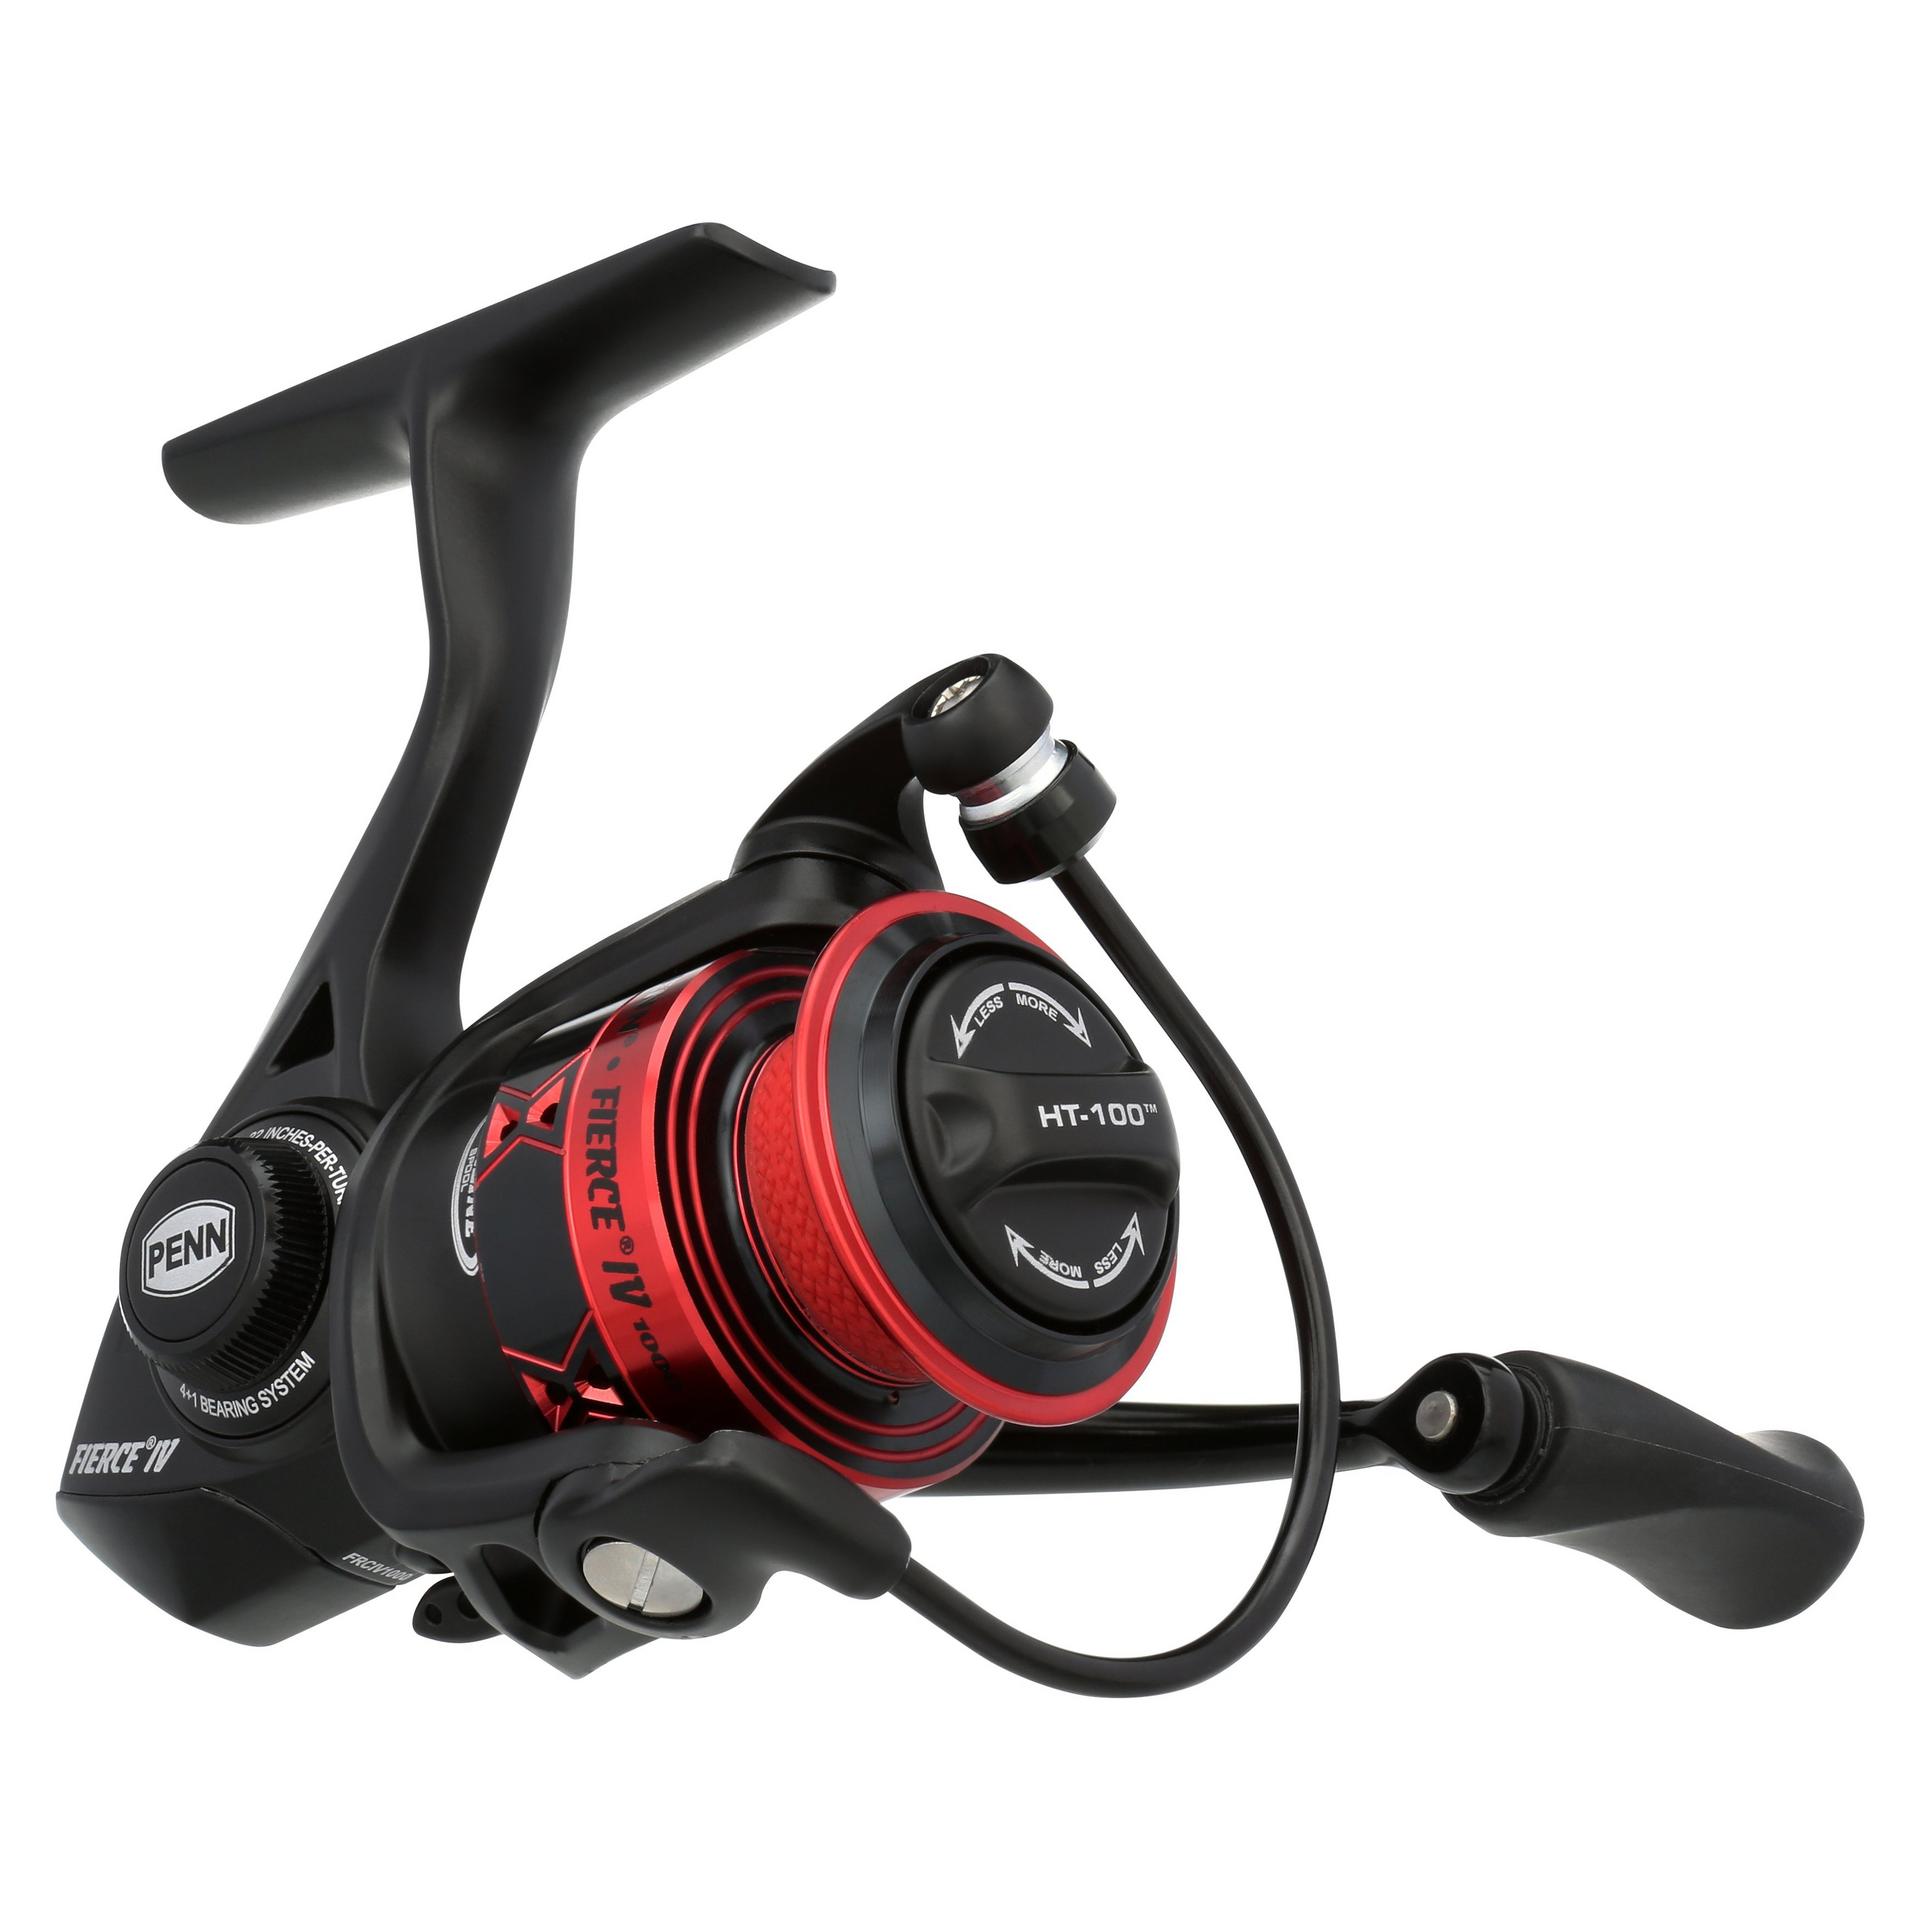 Get Your Free Reel Now! They Won't Last Long - Fish USA